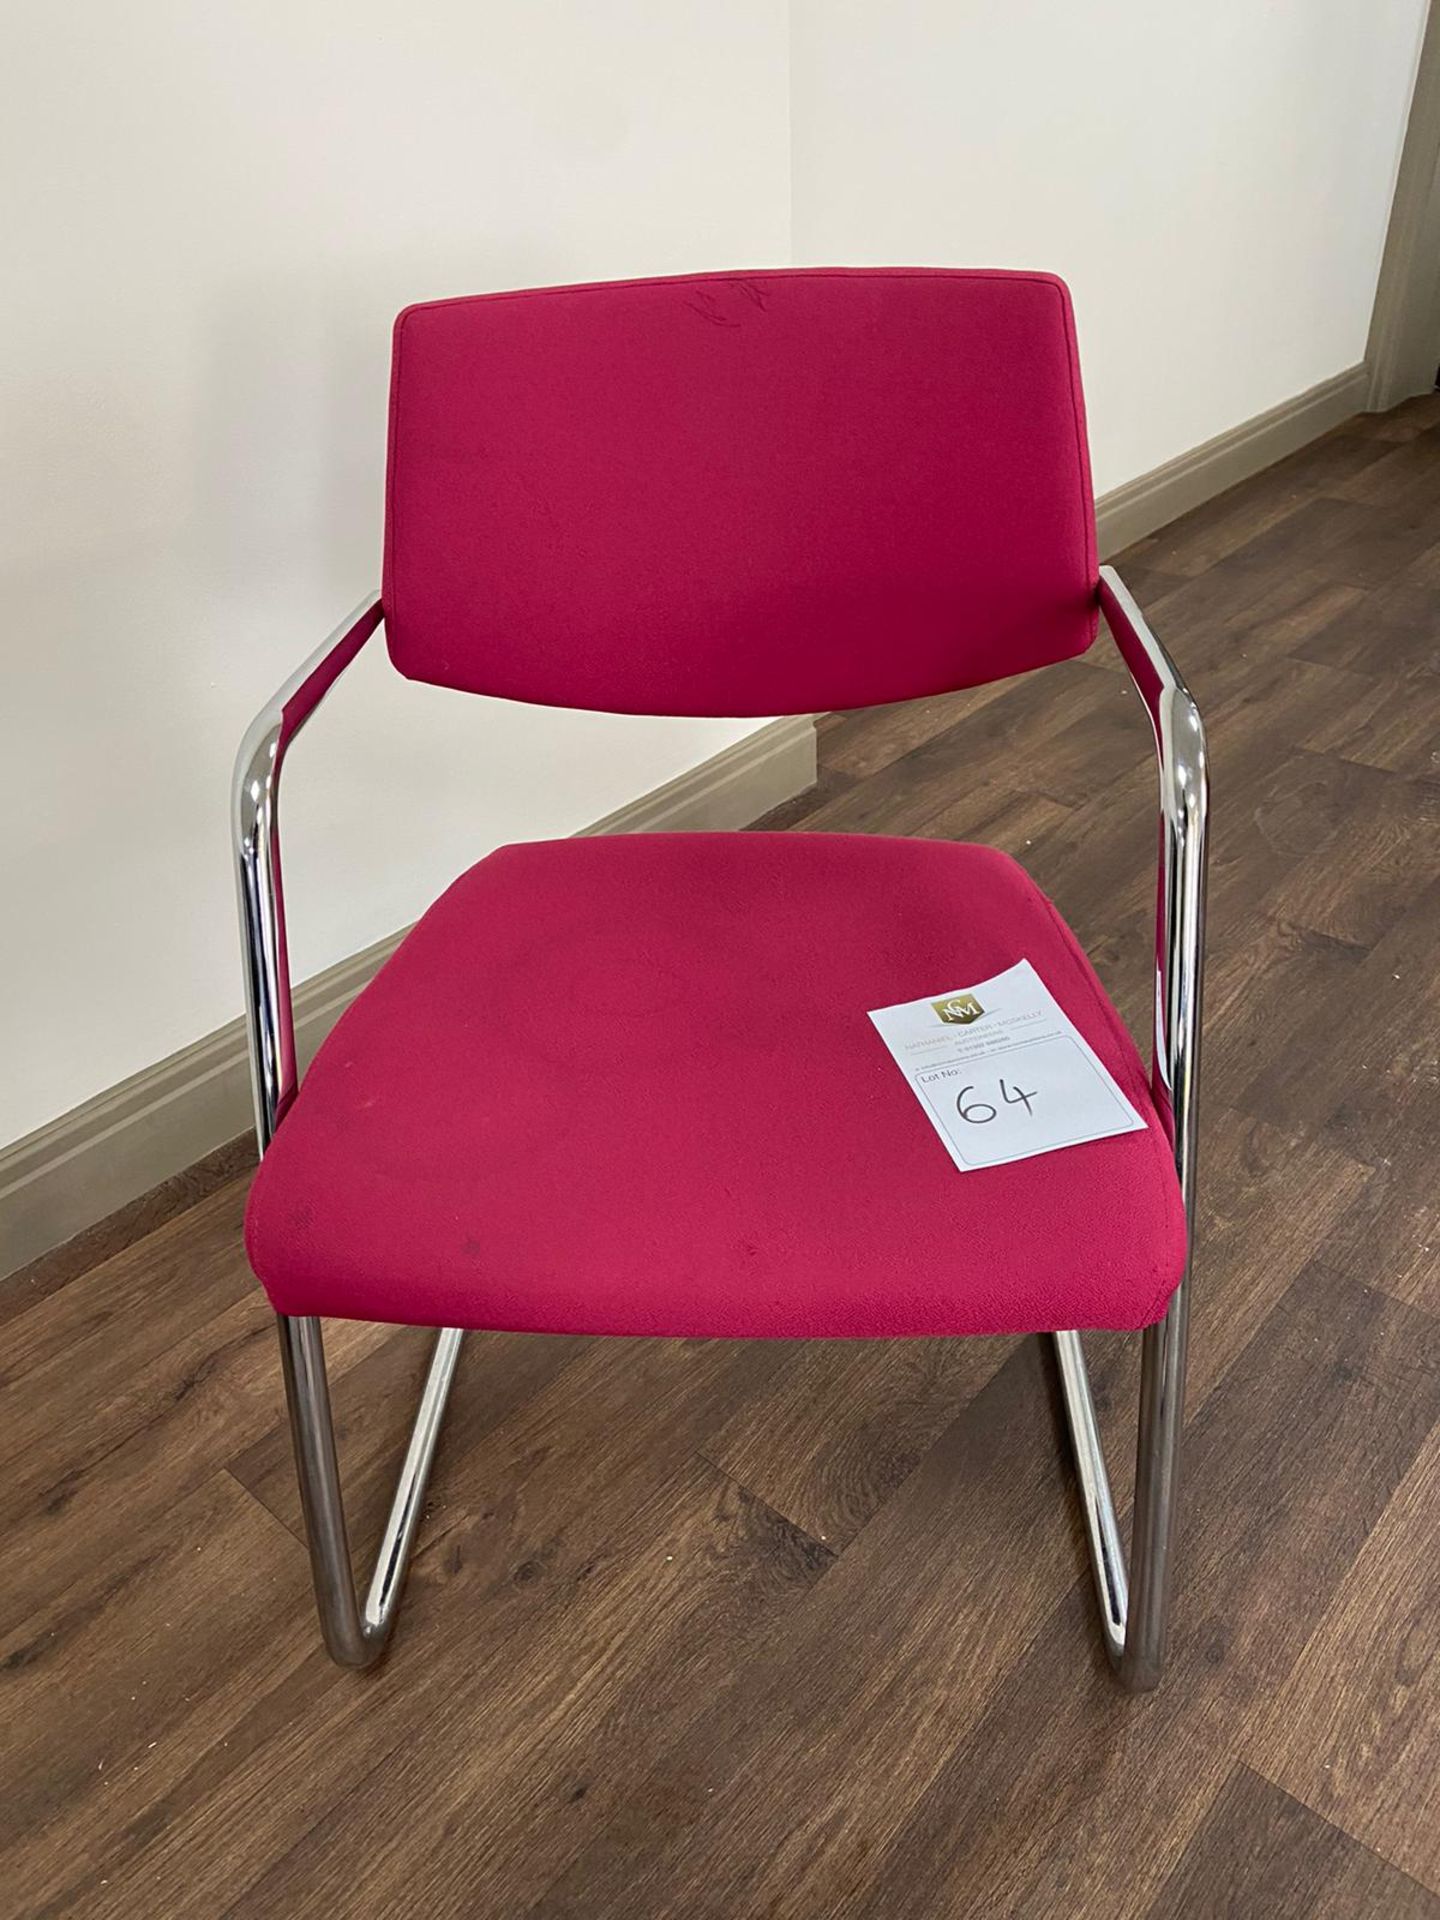 Cerise Pink Waiting Chair